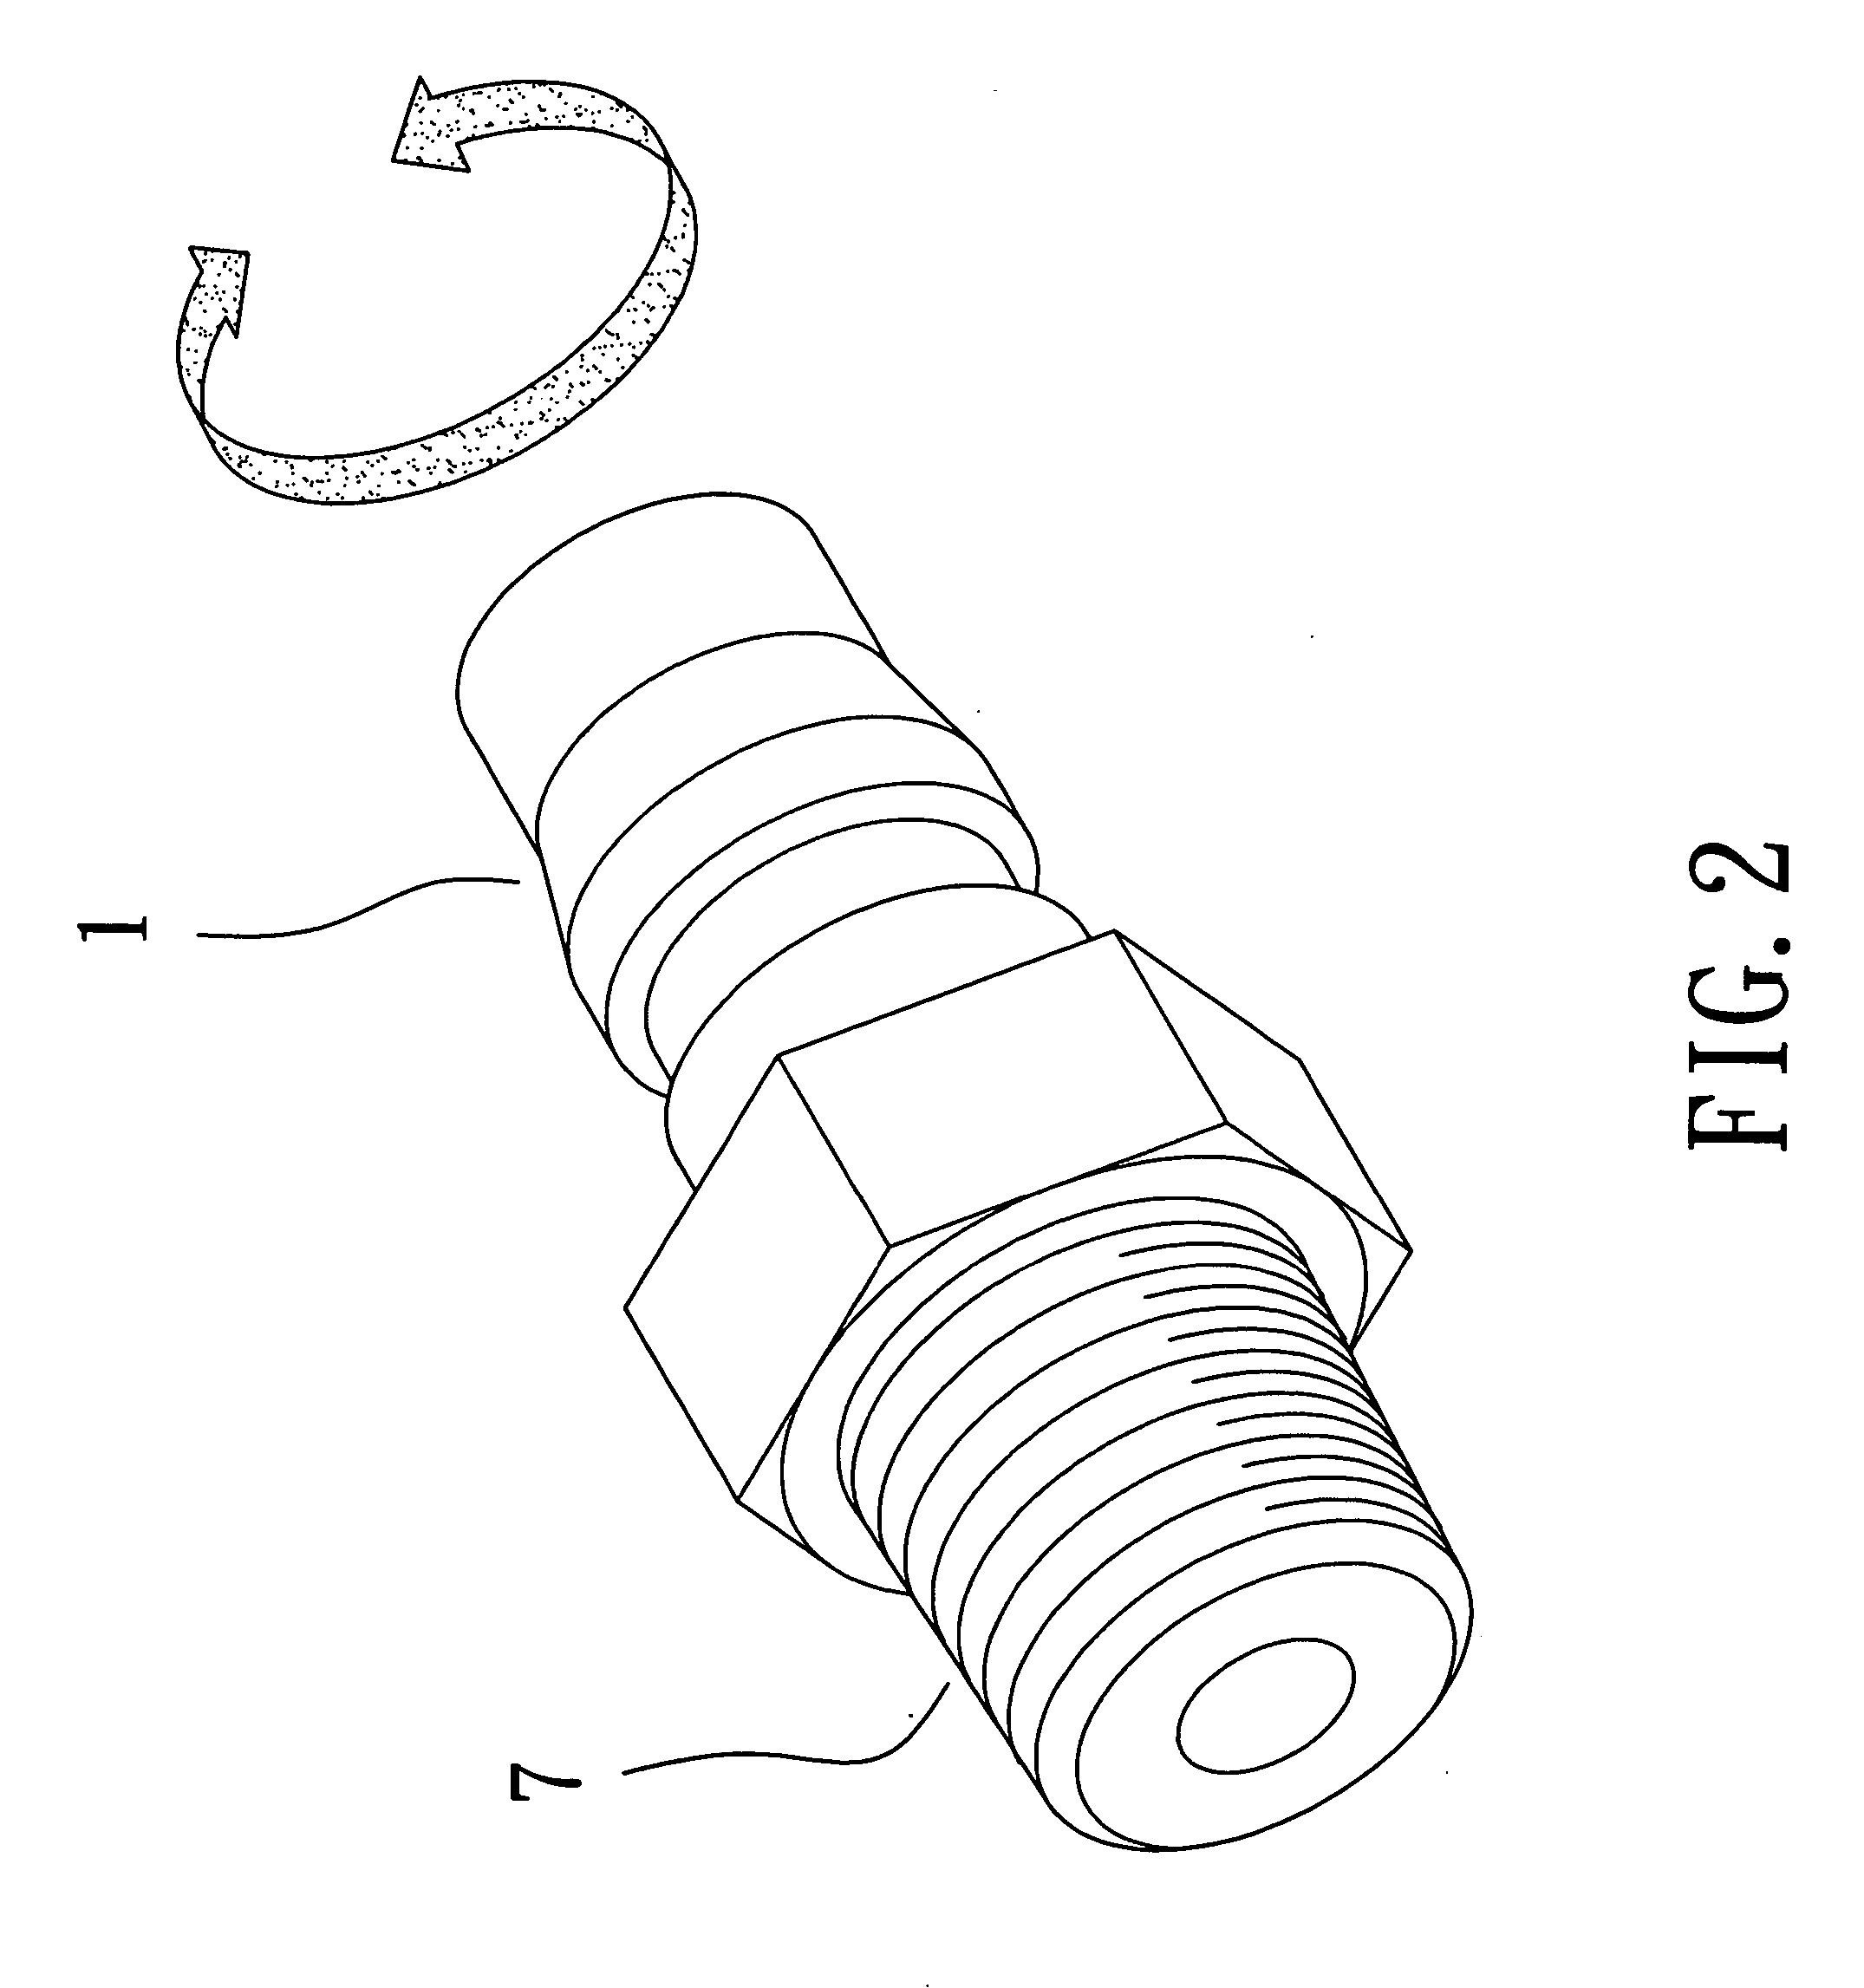 Non-permeable pipe connector structure